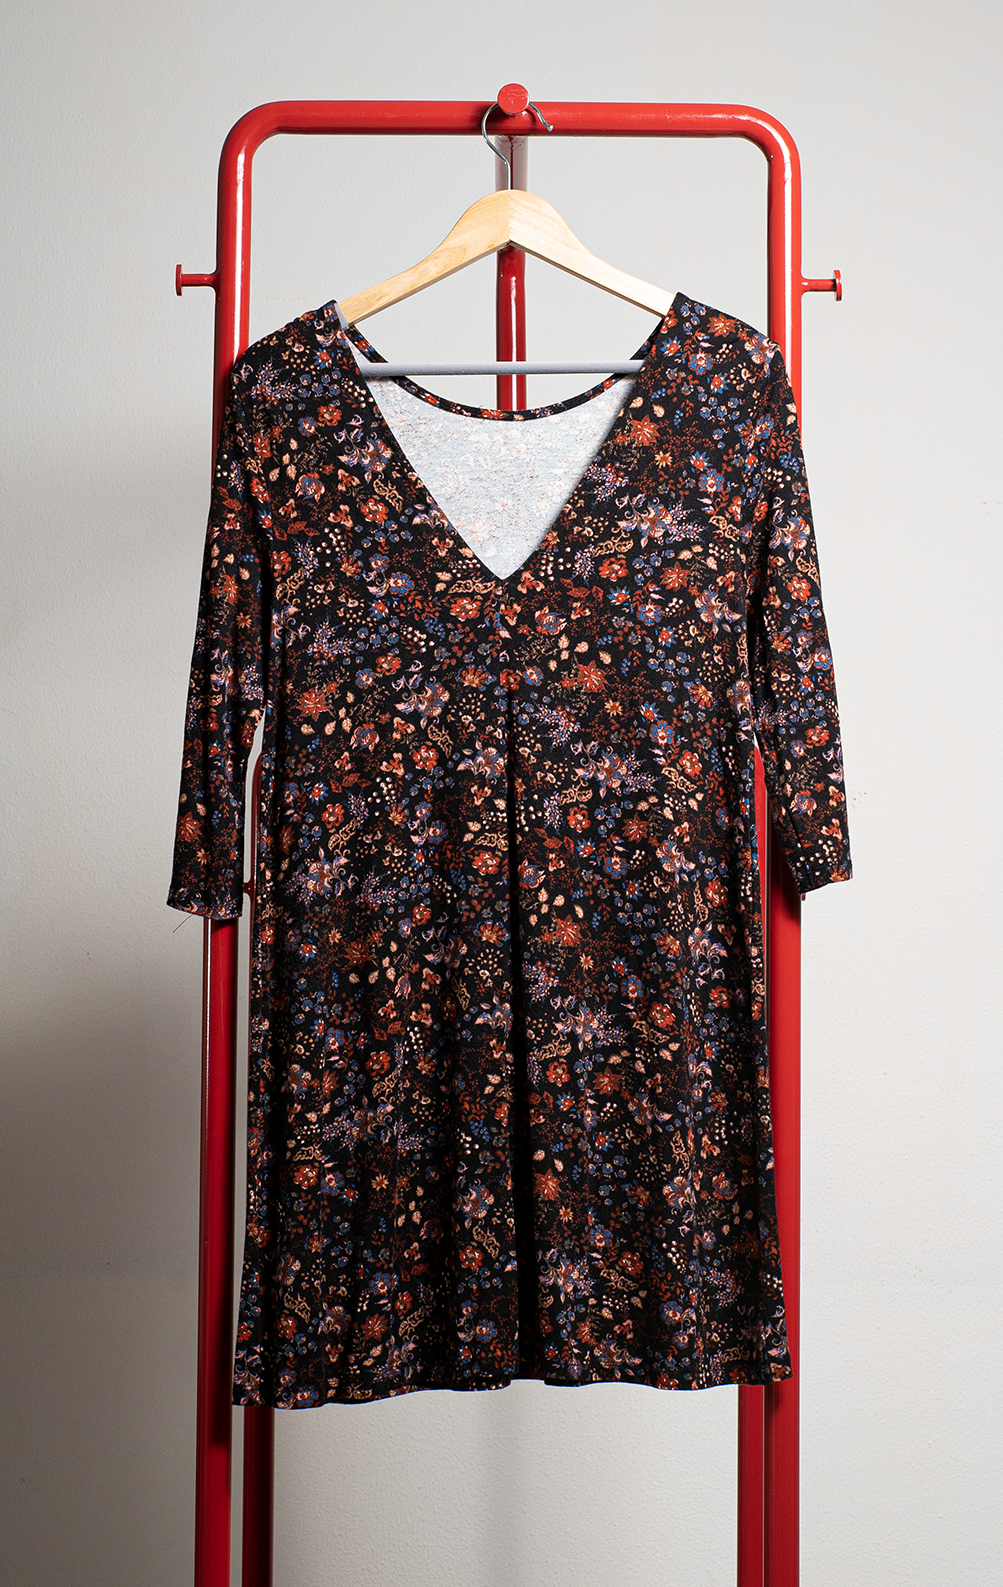 PULL & BEAR DRESS - Black with mini florals pattern pink, red & blue - Small